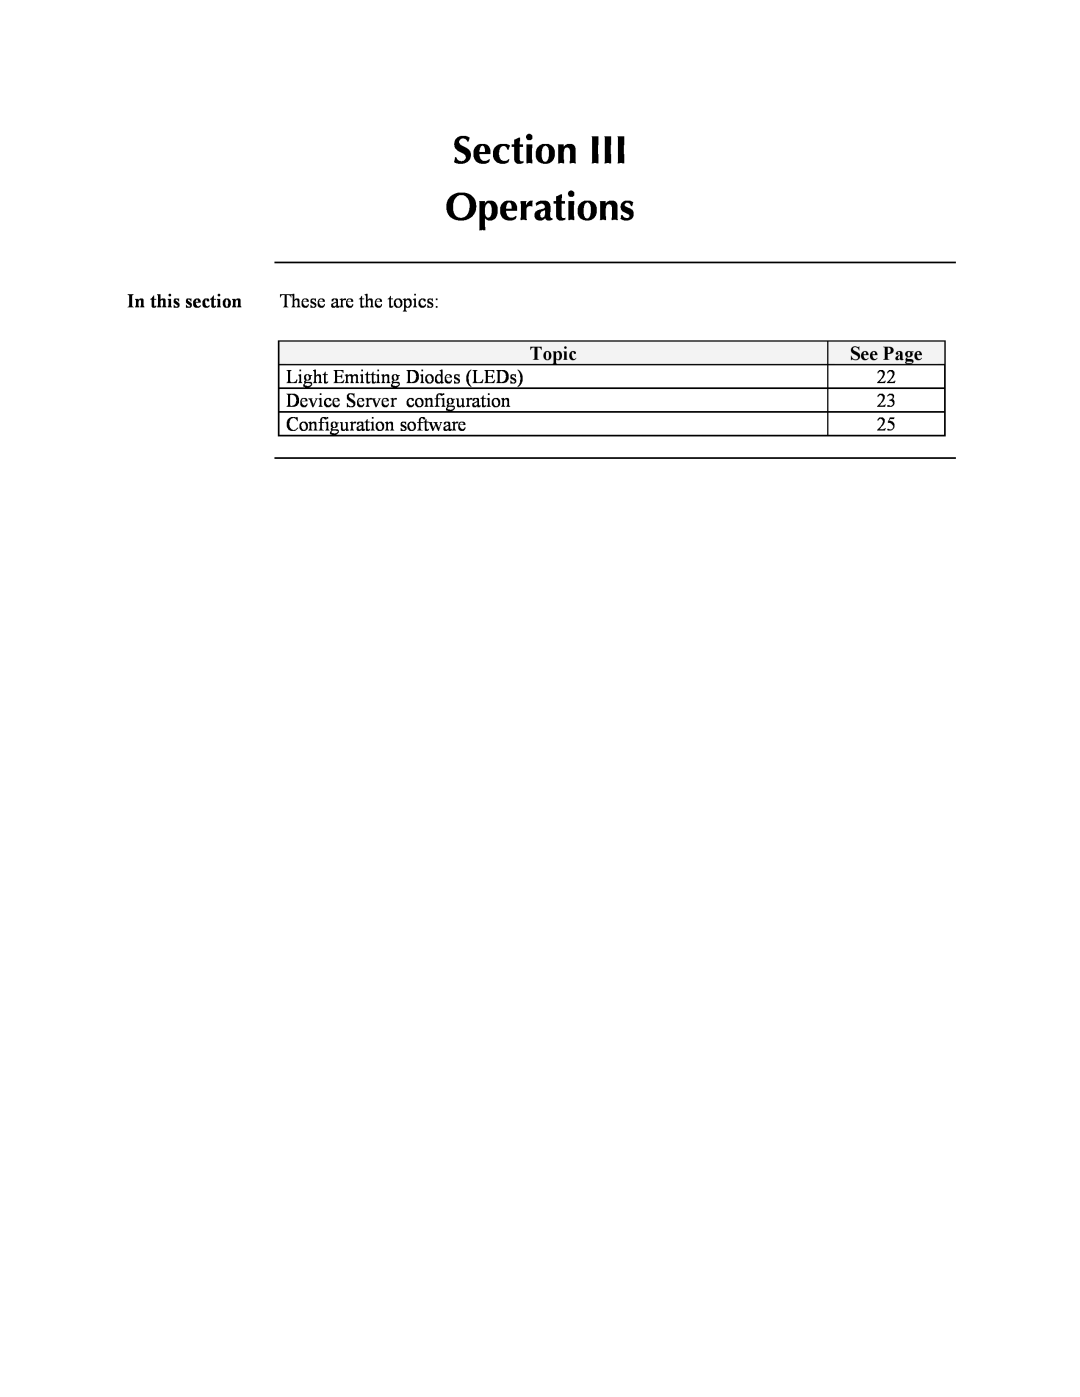 Transition Networks SDSFE31XX-100 Section Operations, In this section These are the topics, Topic, Configuration software 